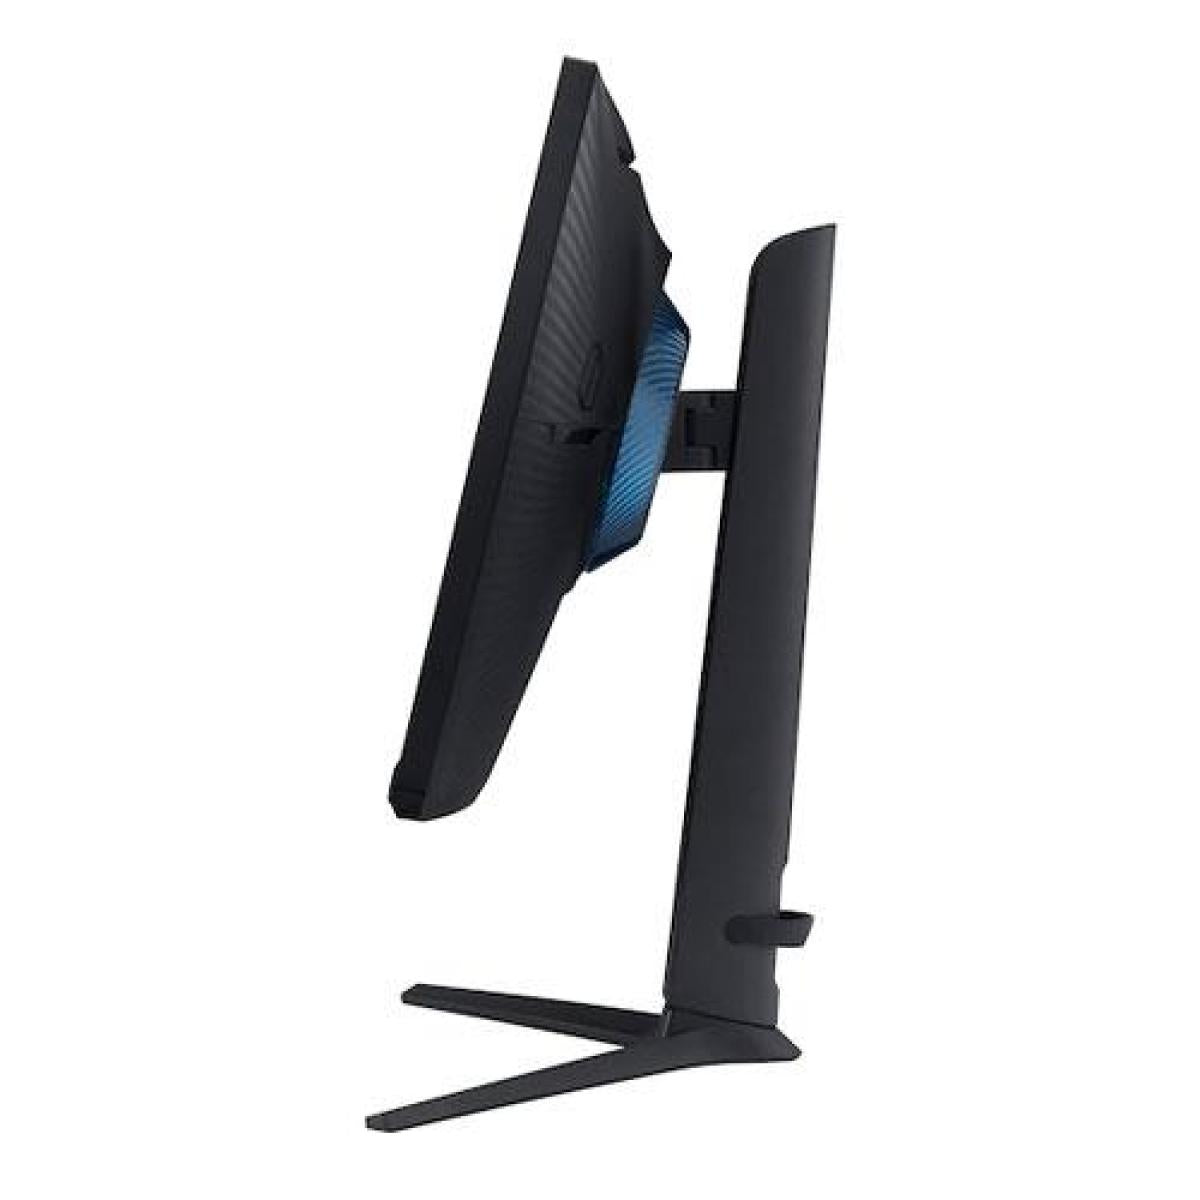 Samsung 32" Gaming Monitor with IPS panel, 165hz refresh rate and 1ms response time